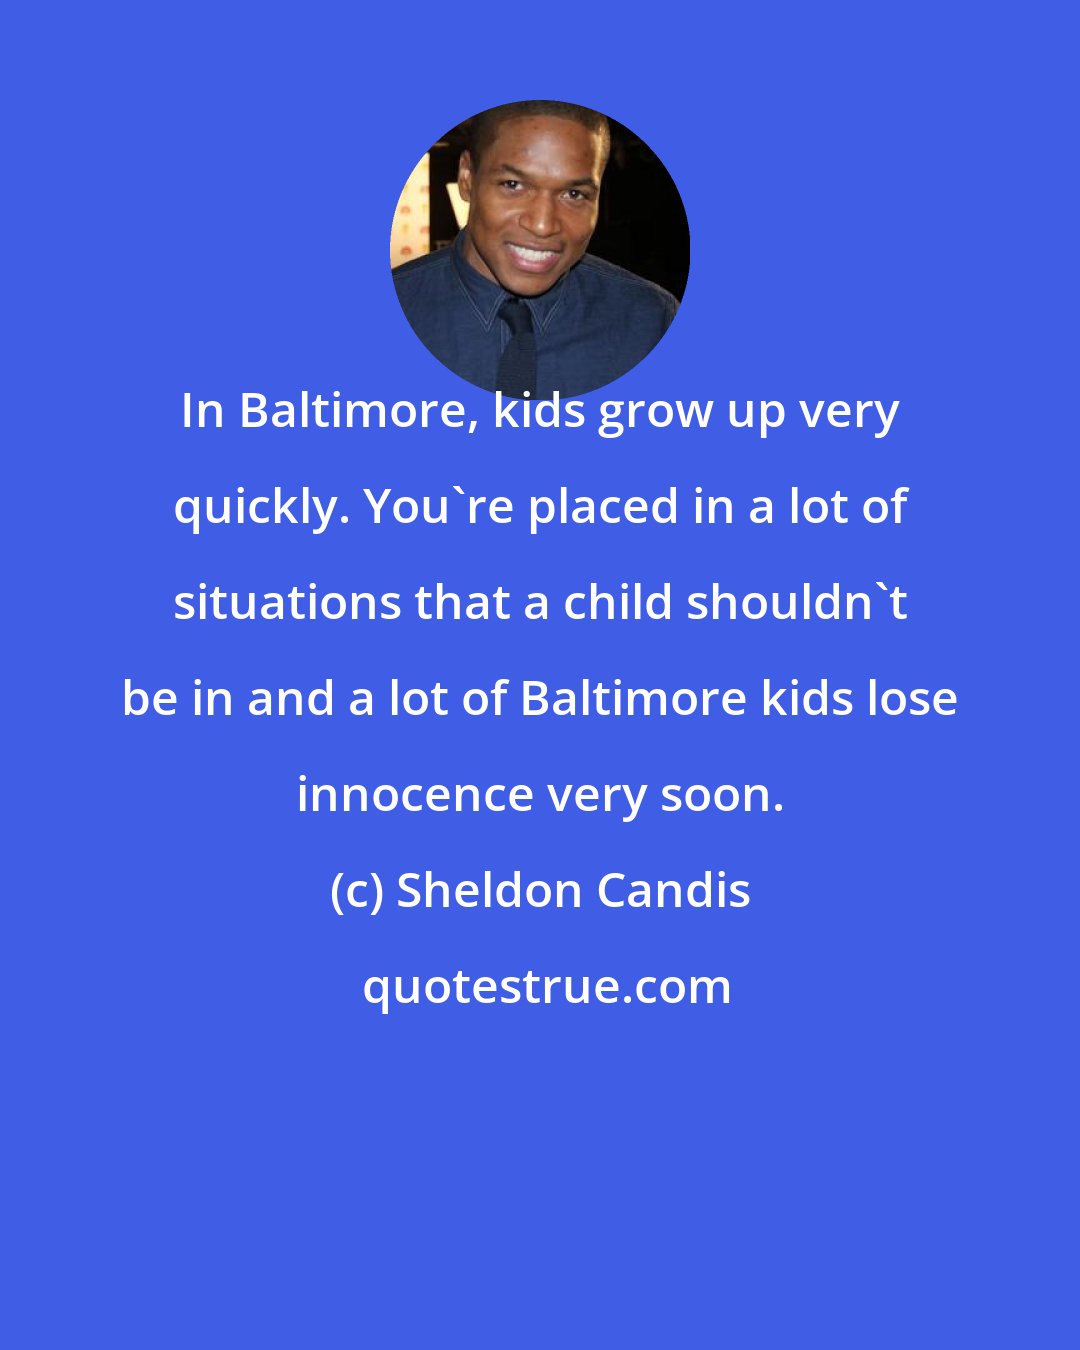 Sheldon Candis: In Baltimore, kids grow up very quickly. You're placed in a lot of situations that a child shouldn't be in and a lot of Baltimore kids lose innocence very soon.